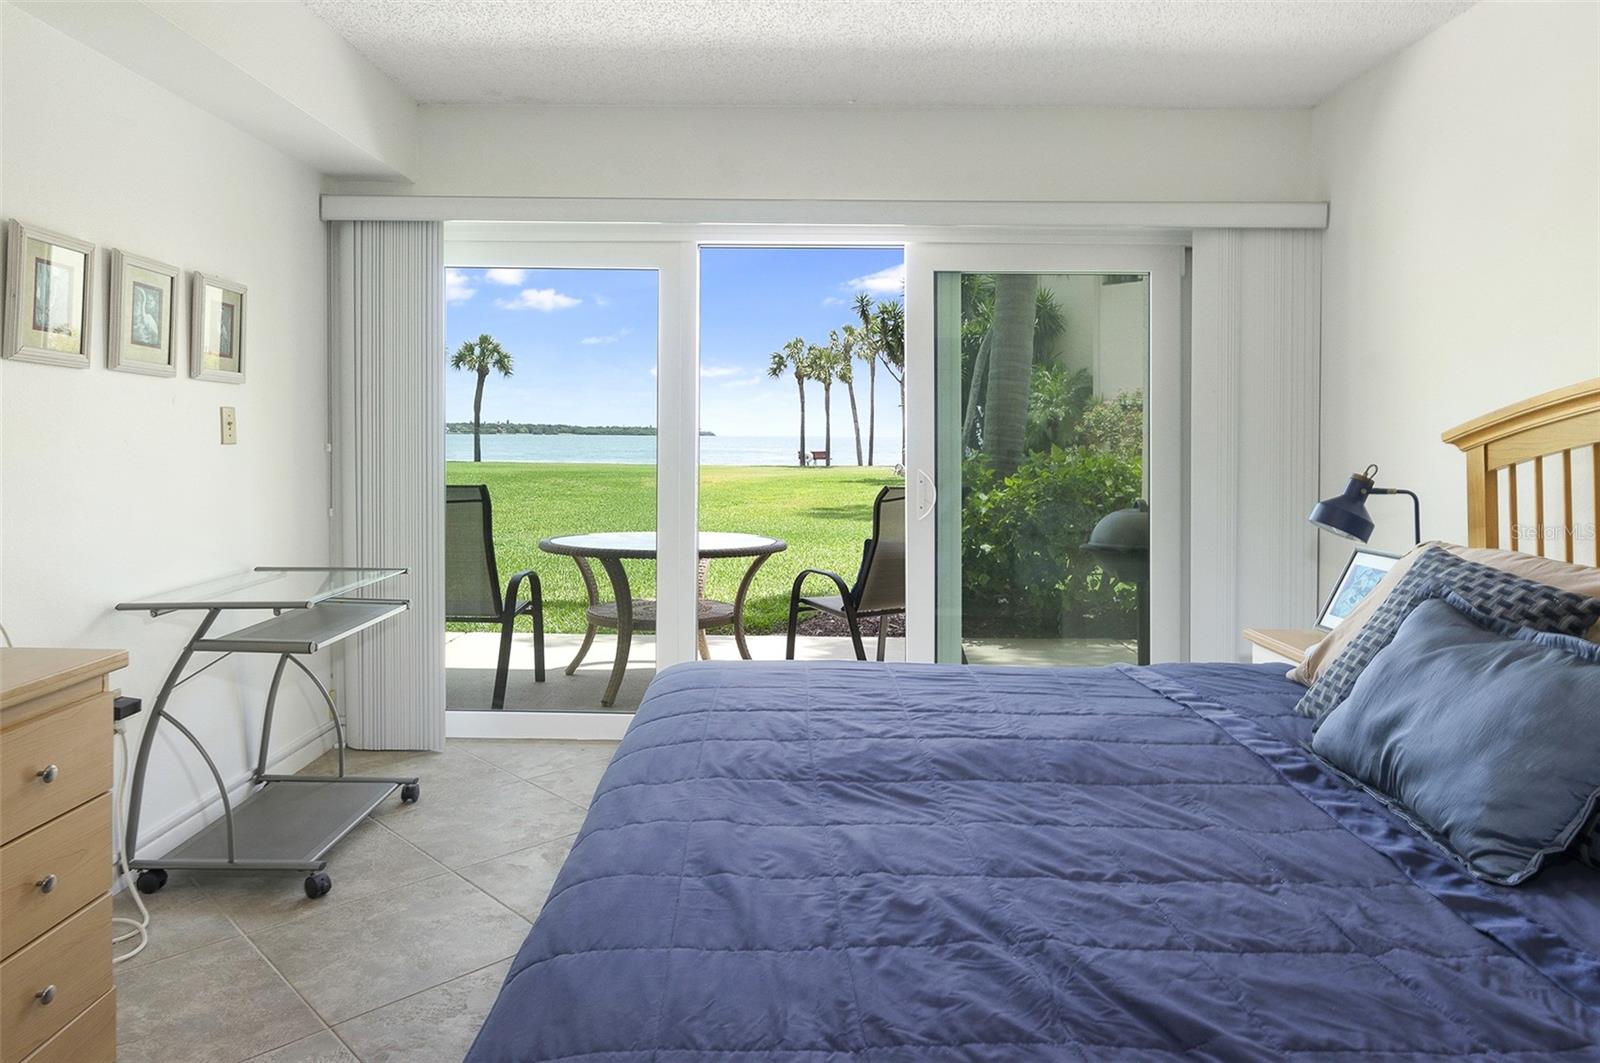 Bedroom, water and patio view